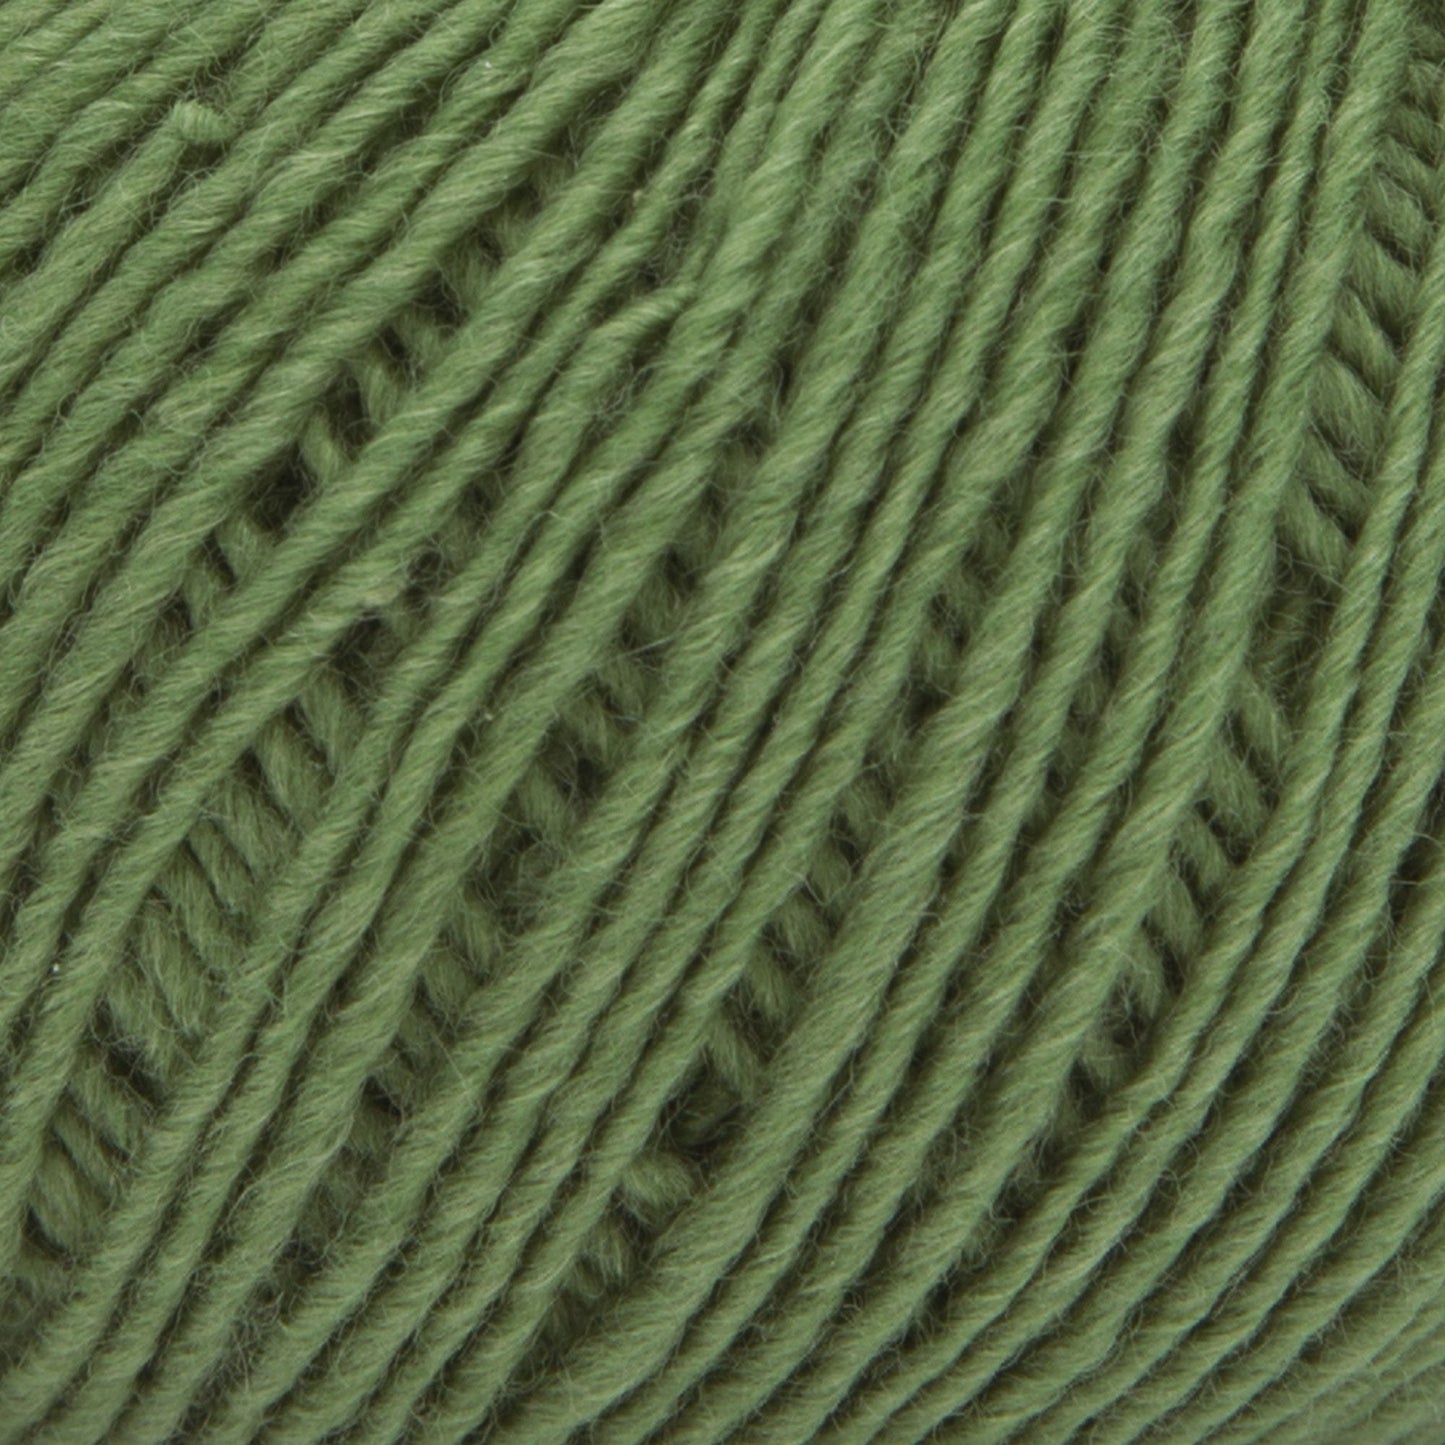 ggh Lacy | Set of 4 x 25g (total 100g) - 007 - Olive Green